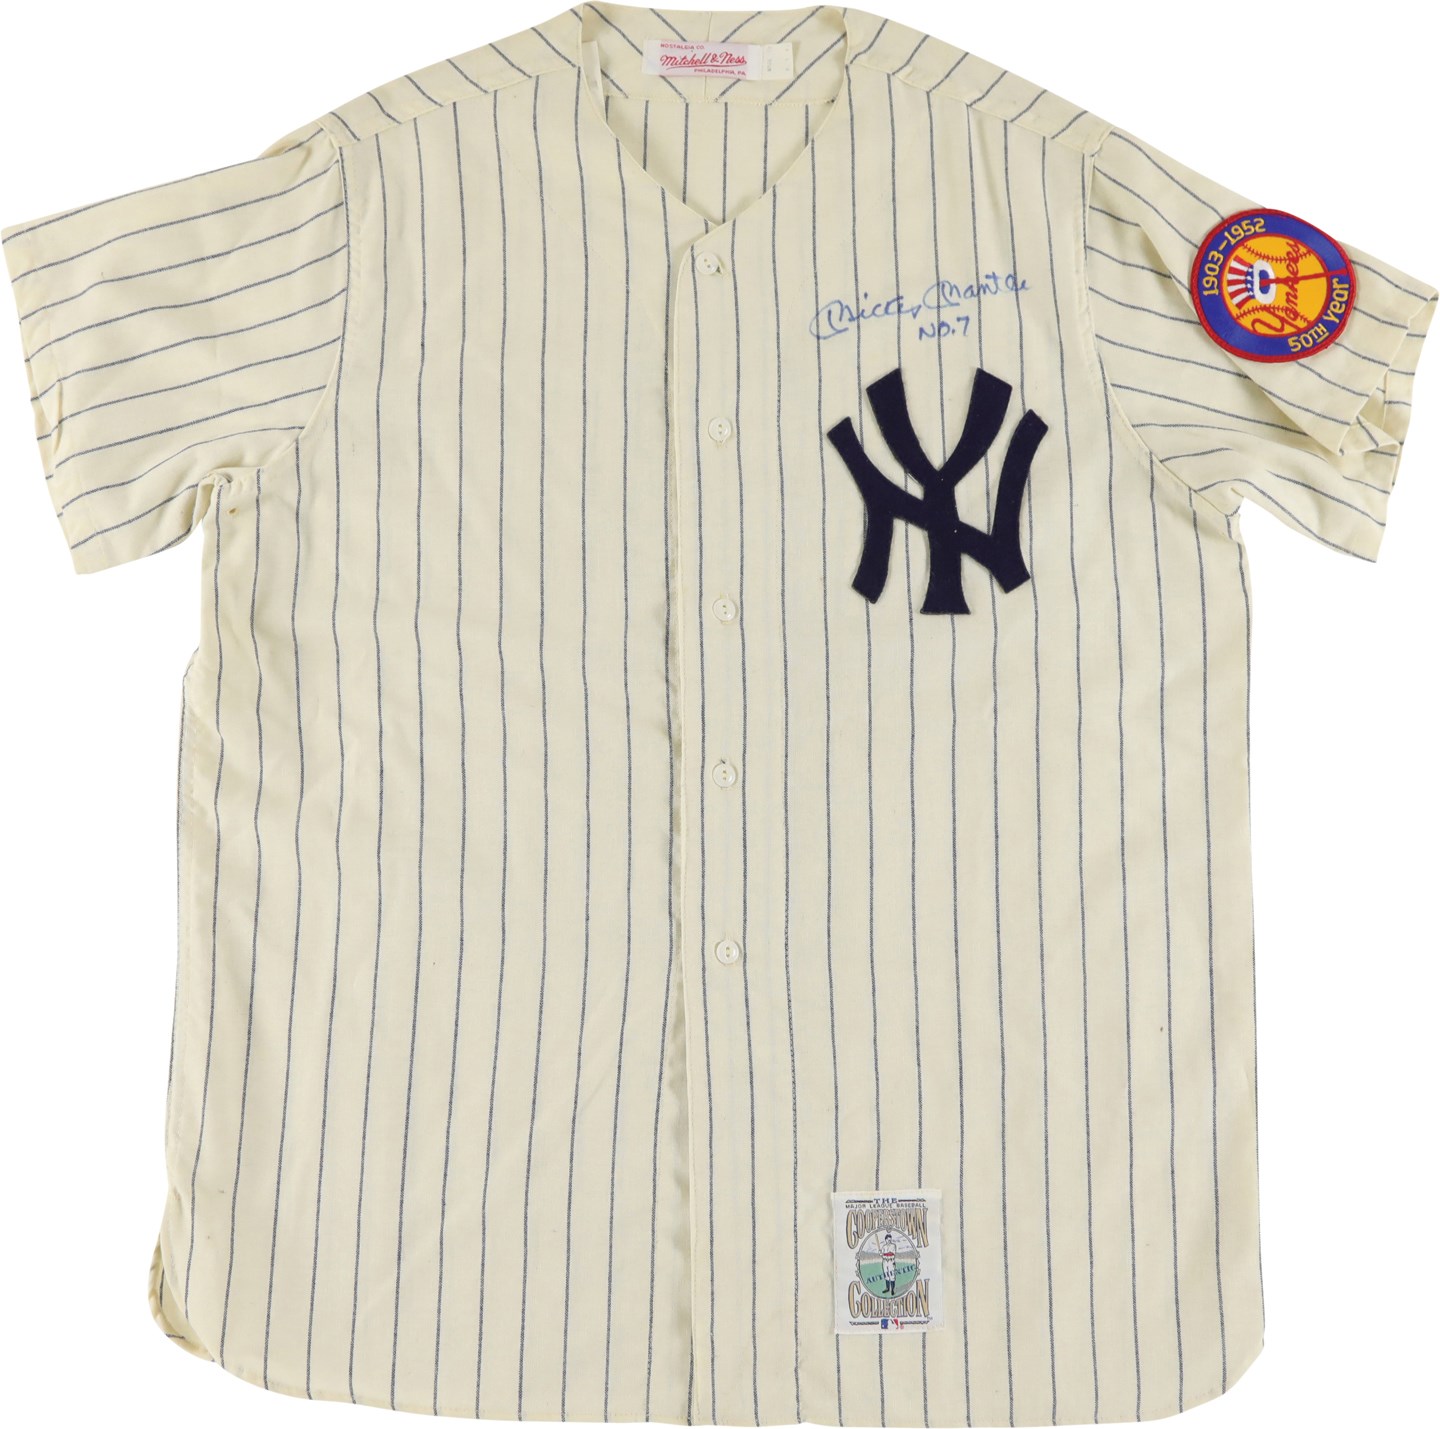 Baseball Autographs - 1951 Mickey Mantle Signed New York Yankees Jersey with No. 7 Inscription (PSA)